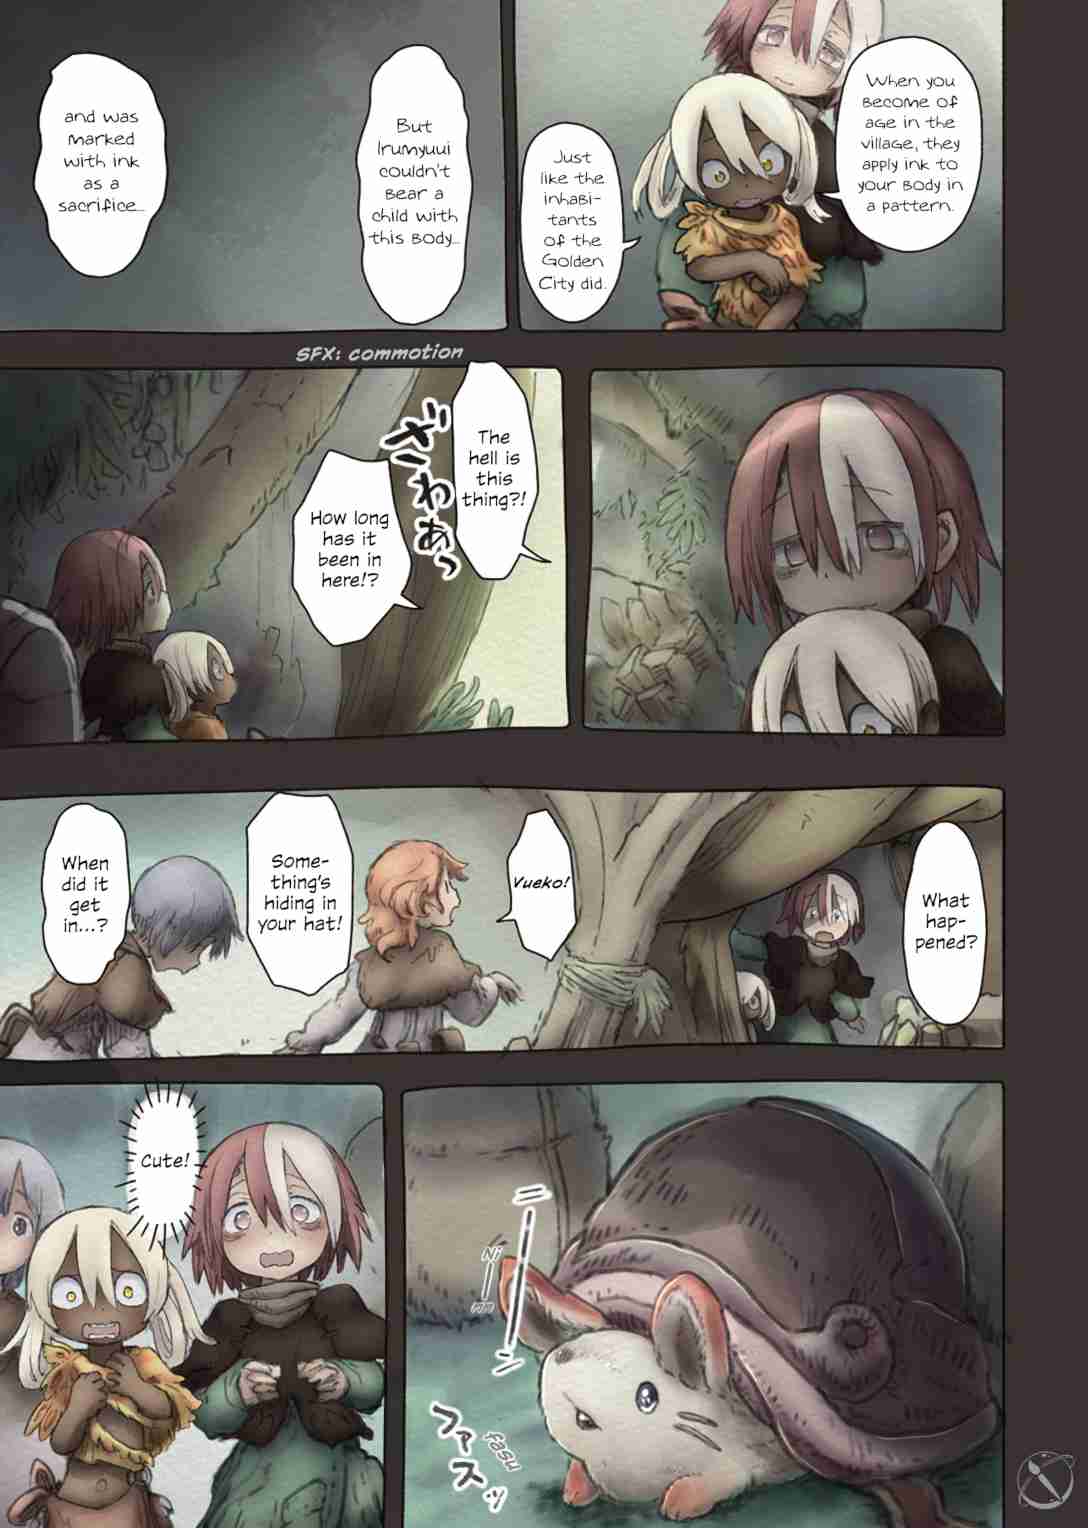 Made in Abyss (fan colored) Vol. 8 Ch. 49 The Golden City [Colored]